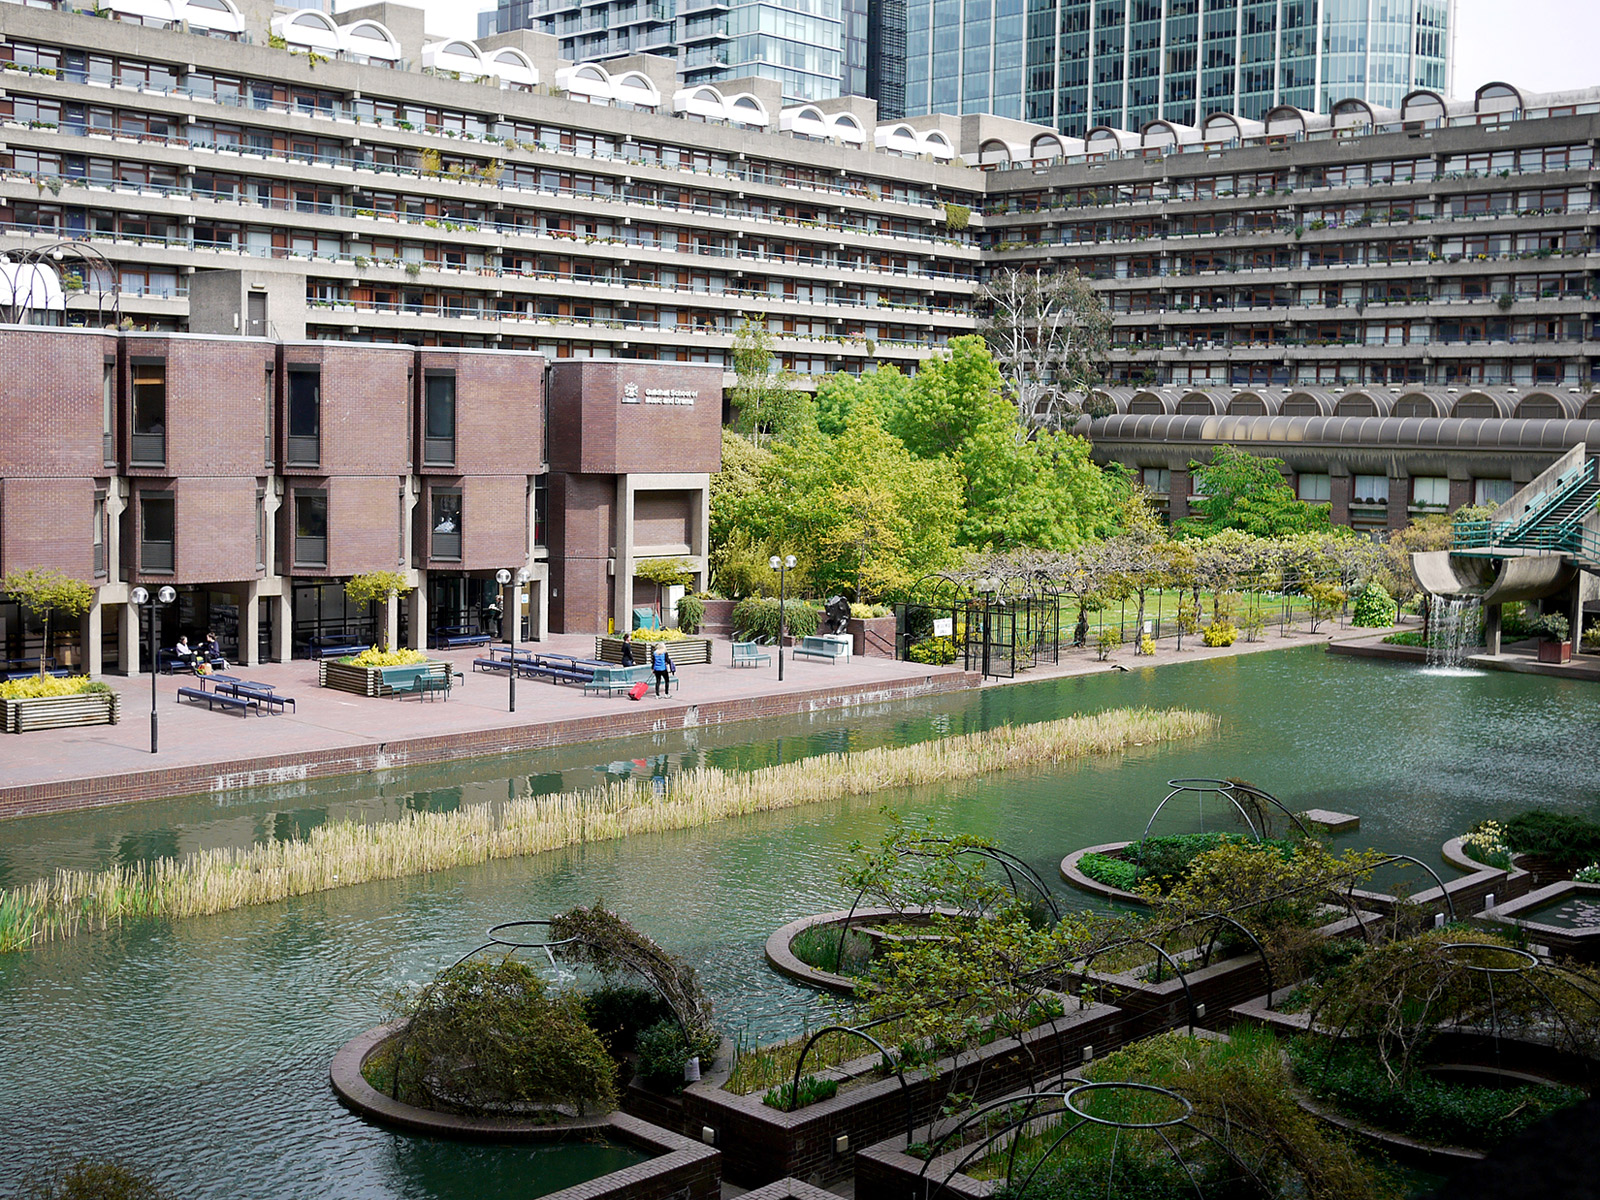 The Barbican Estate.Photography: This Brutal House / @BrutalHouse